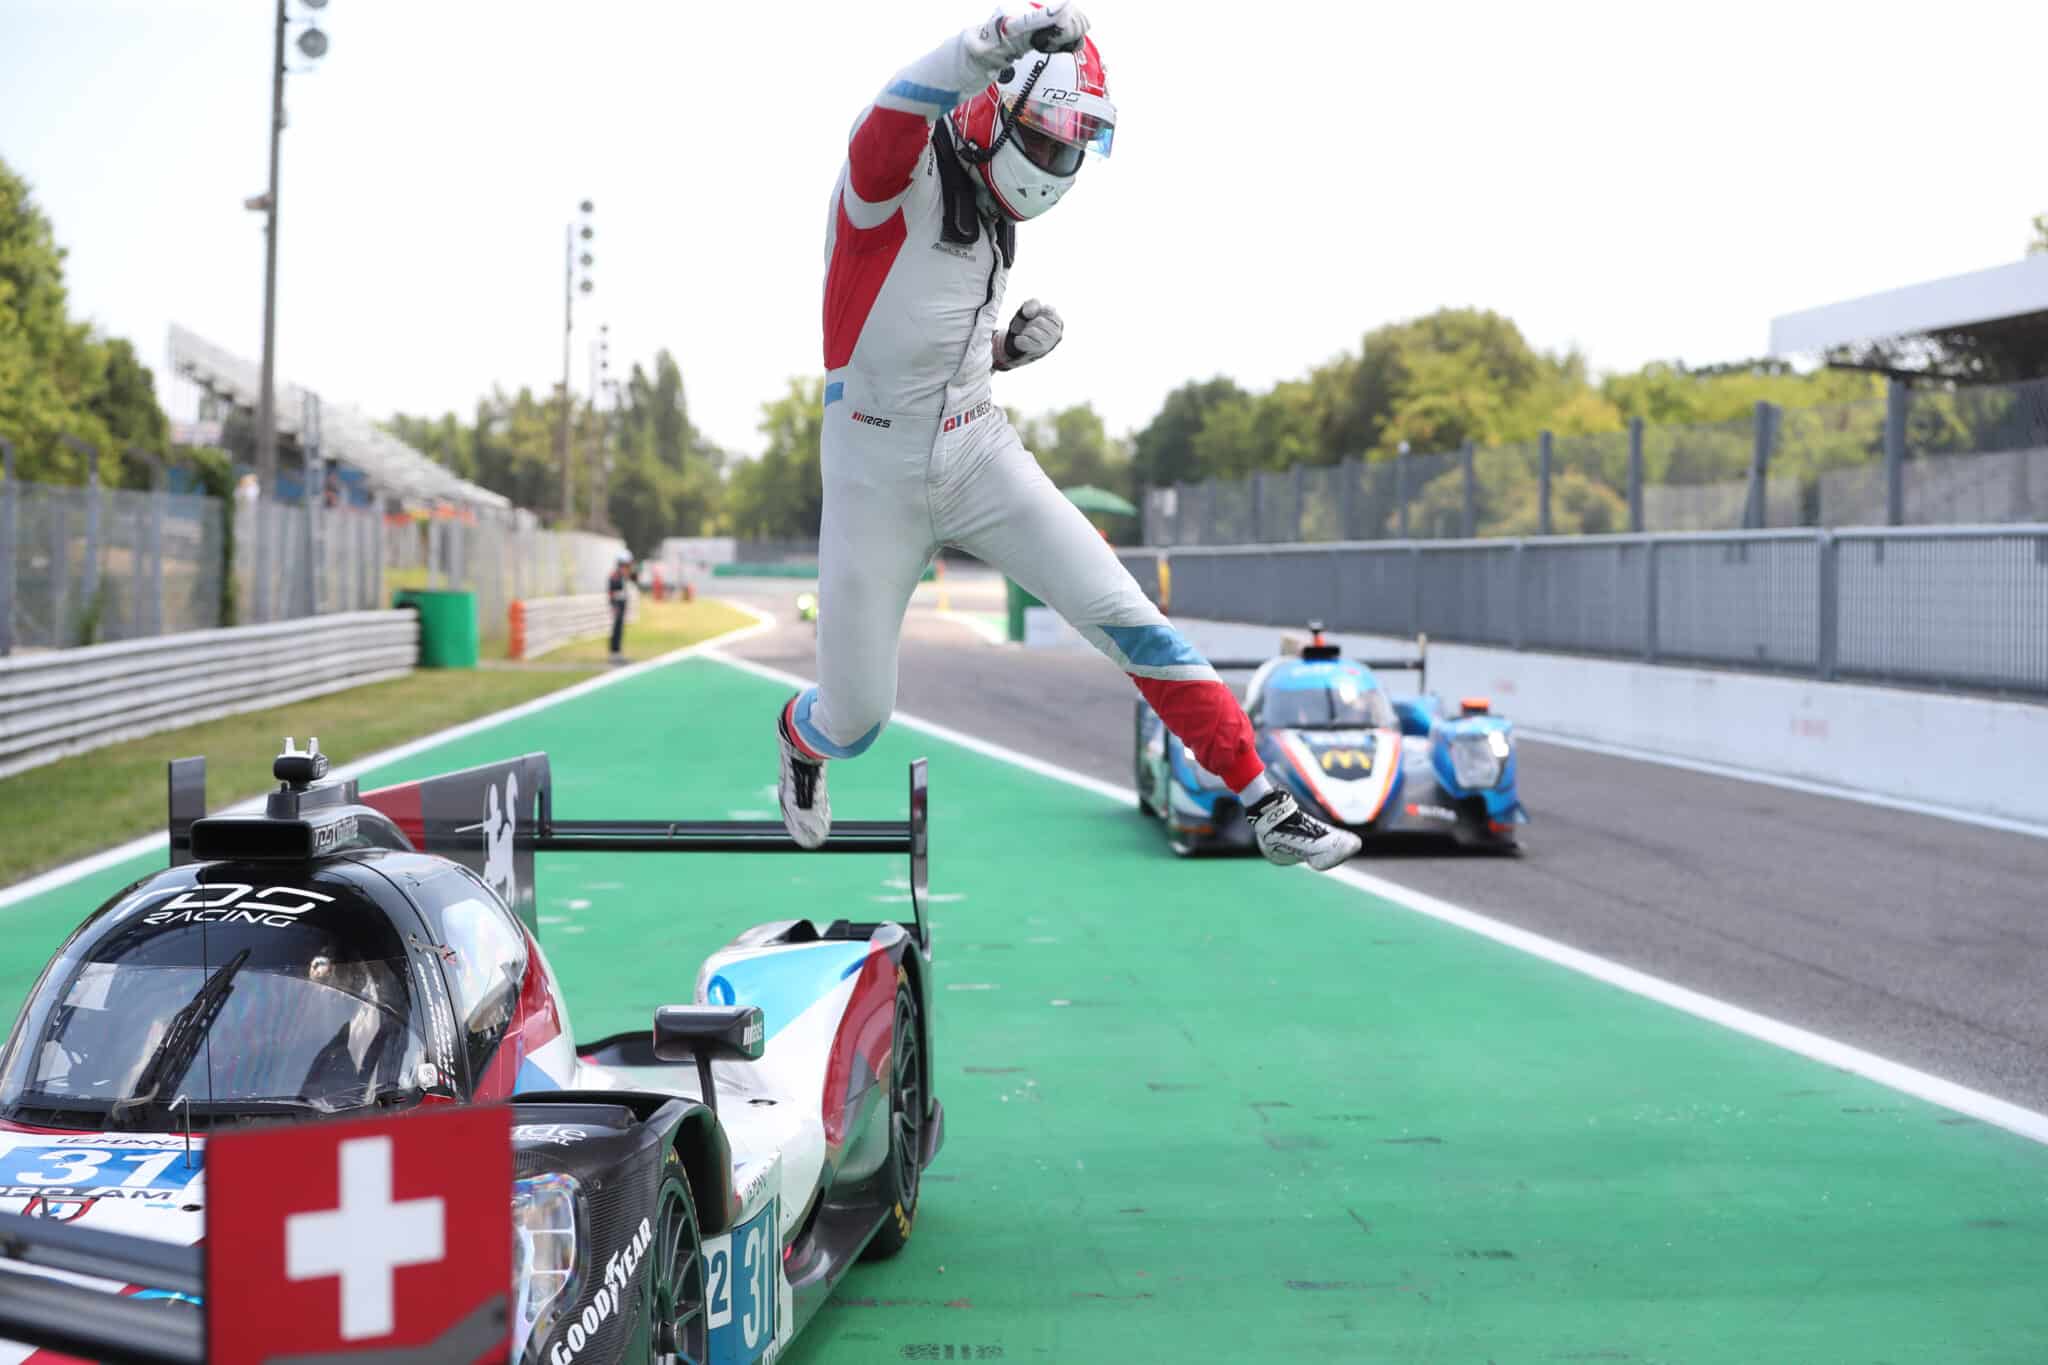 a man in a red and white suit is jumping over a race car